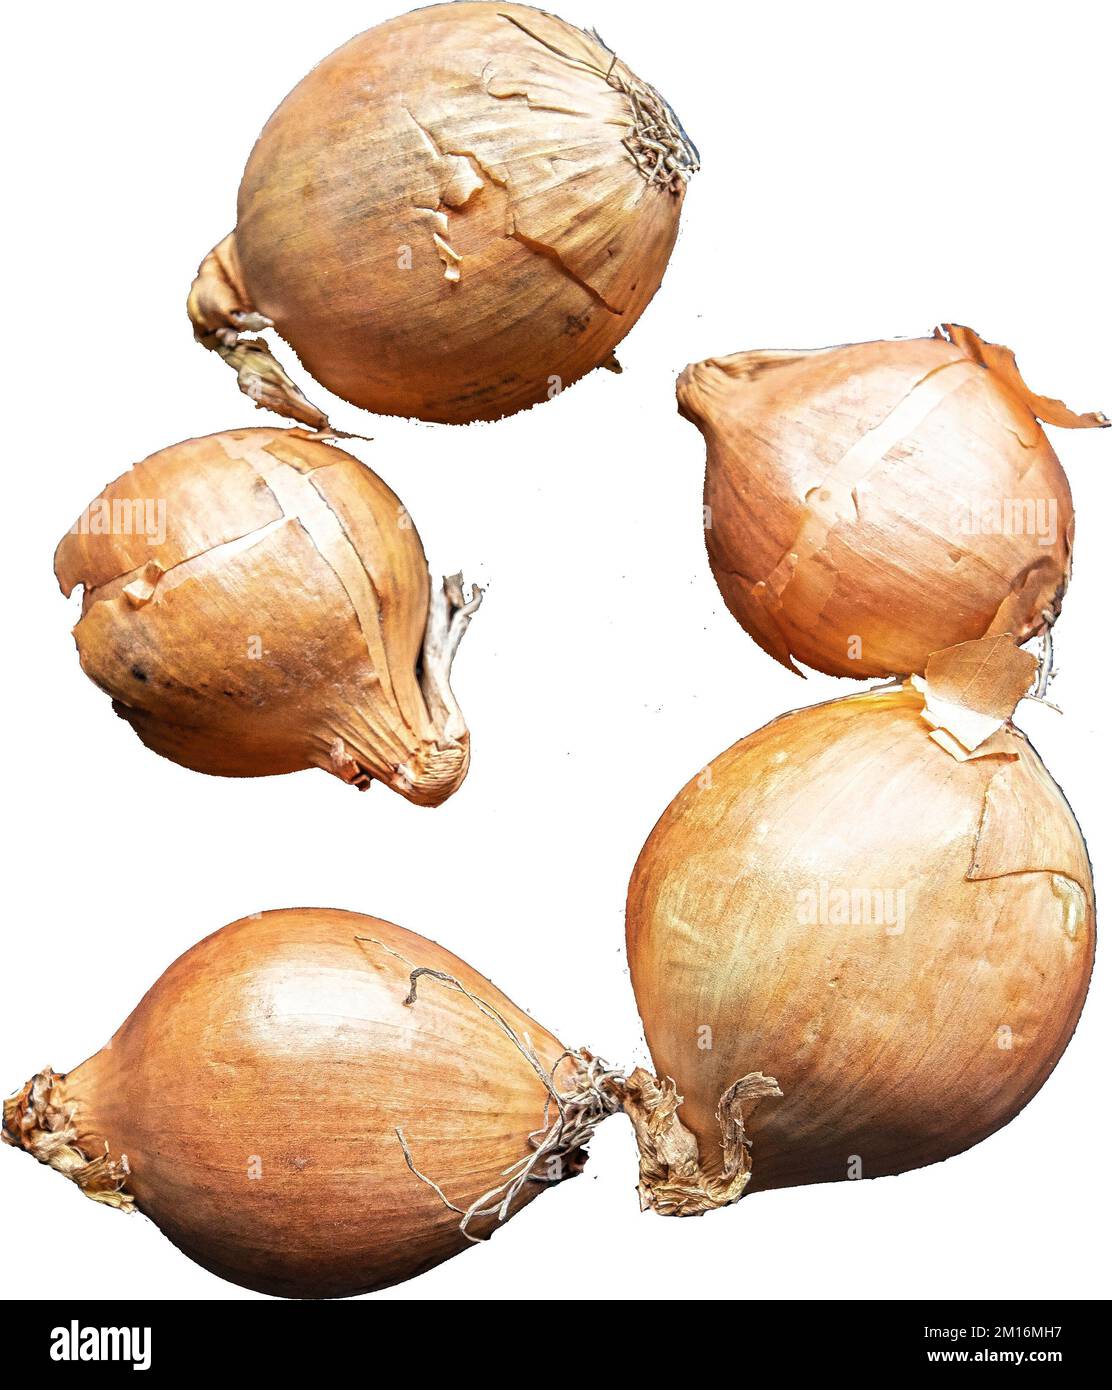 Close up of a composition of 5 unpeeled onions on a white background Stock Photo